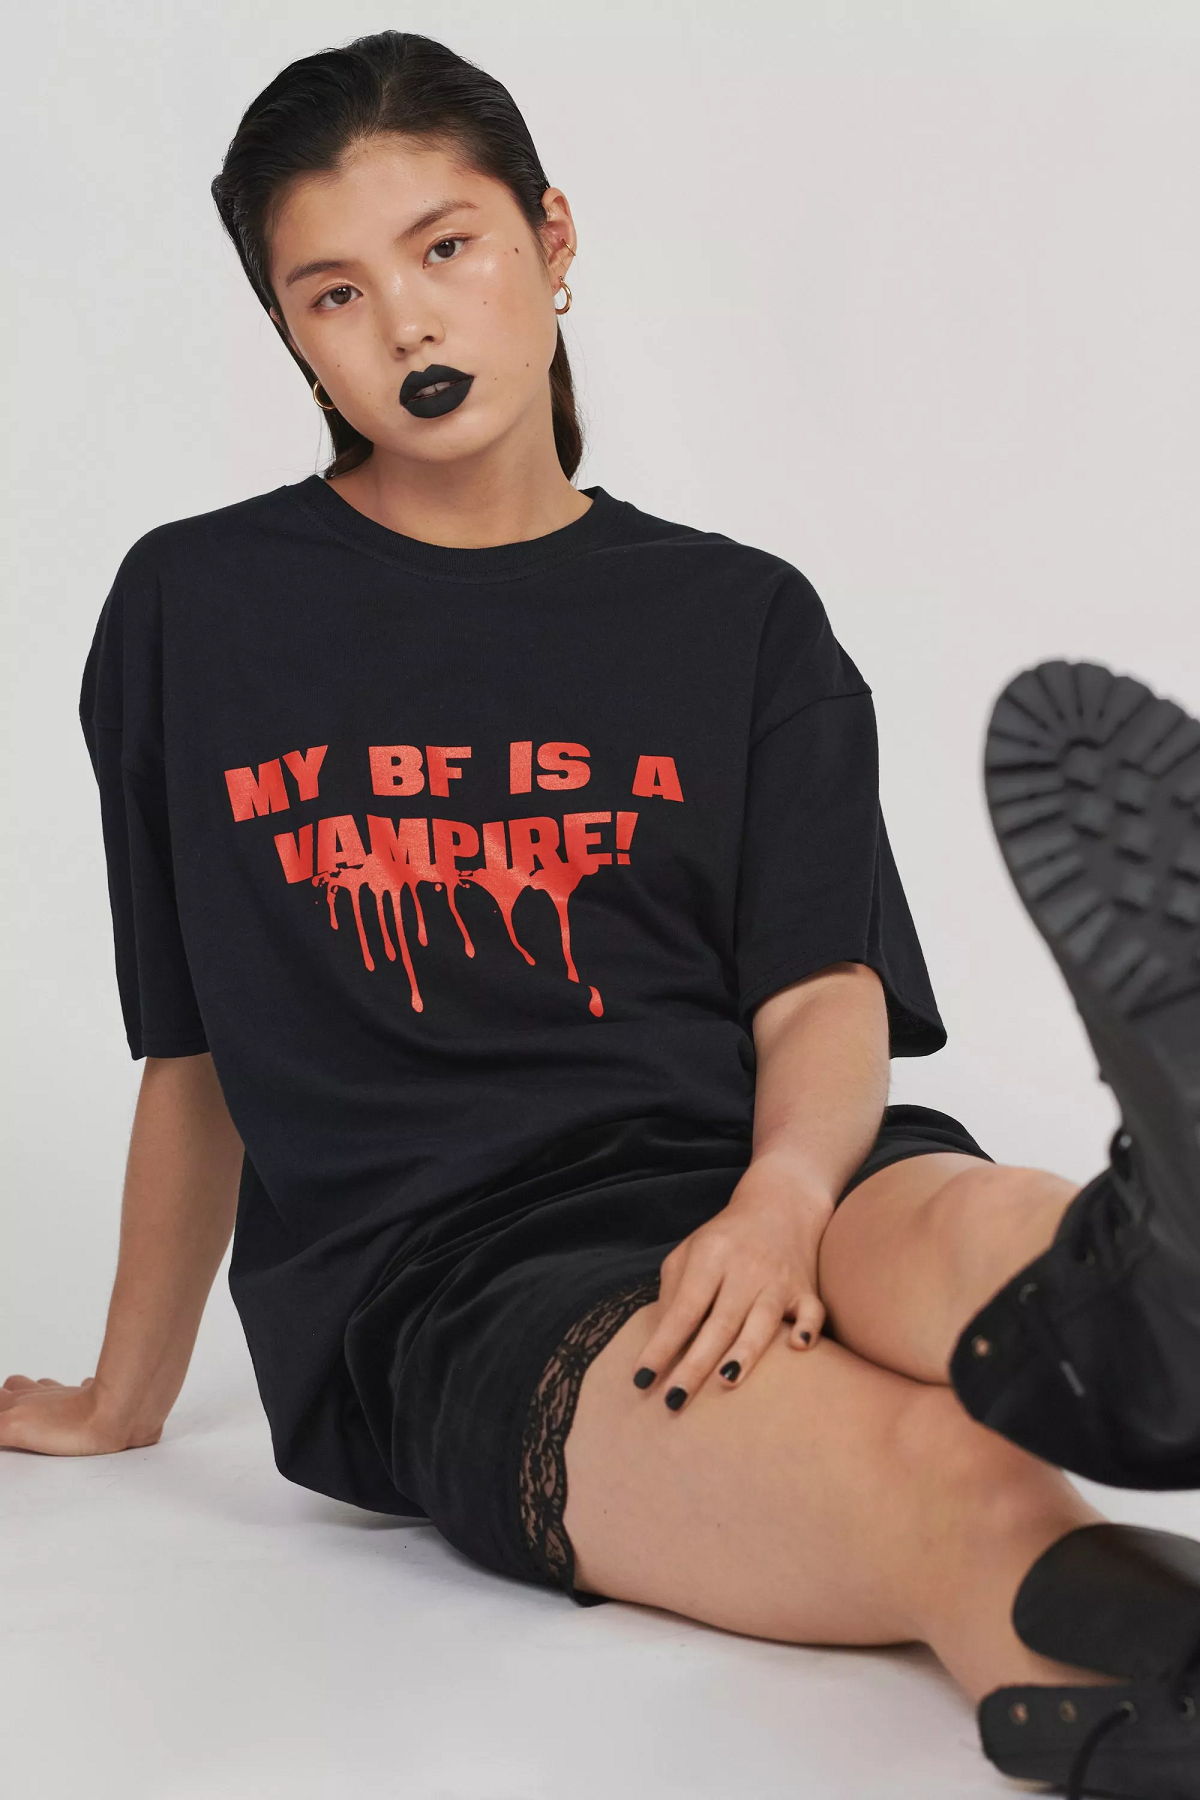 A person wearing a T-shirt that says my bf is a vampire